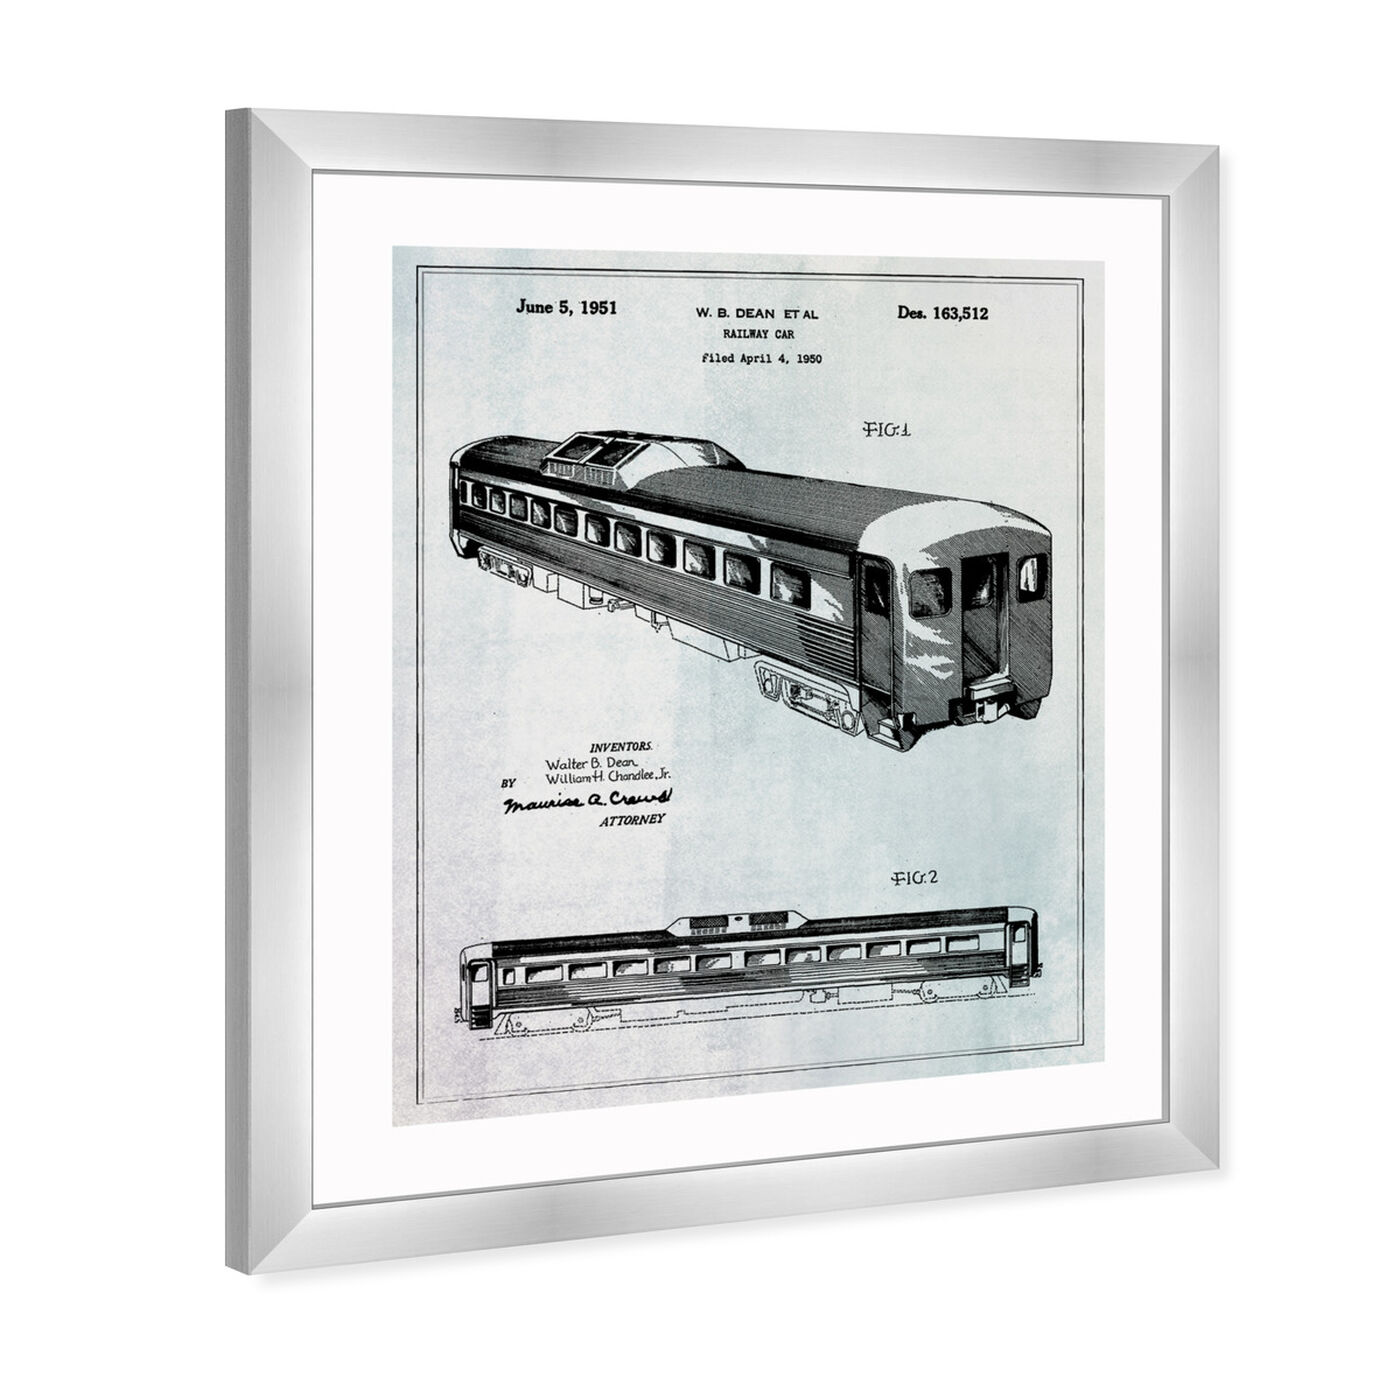 Angled view of Railway Car 1951 featuring transportation and trains art.